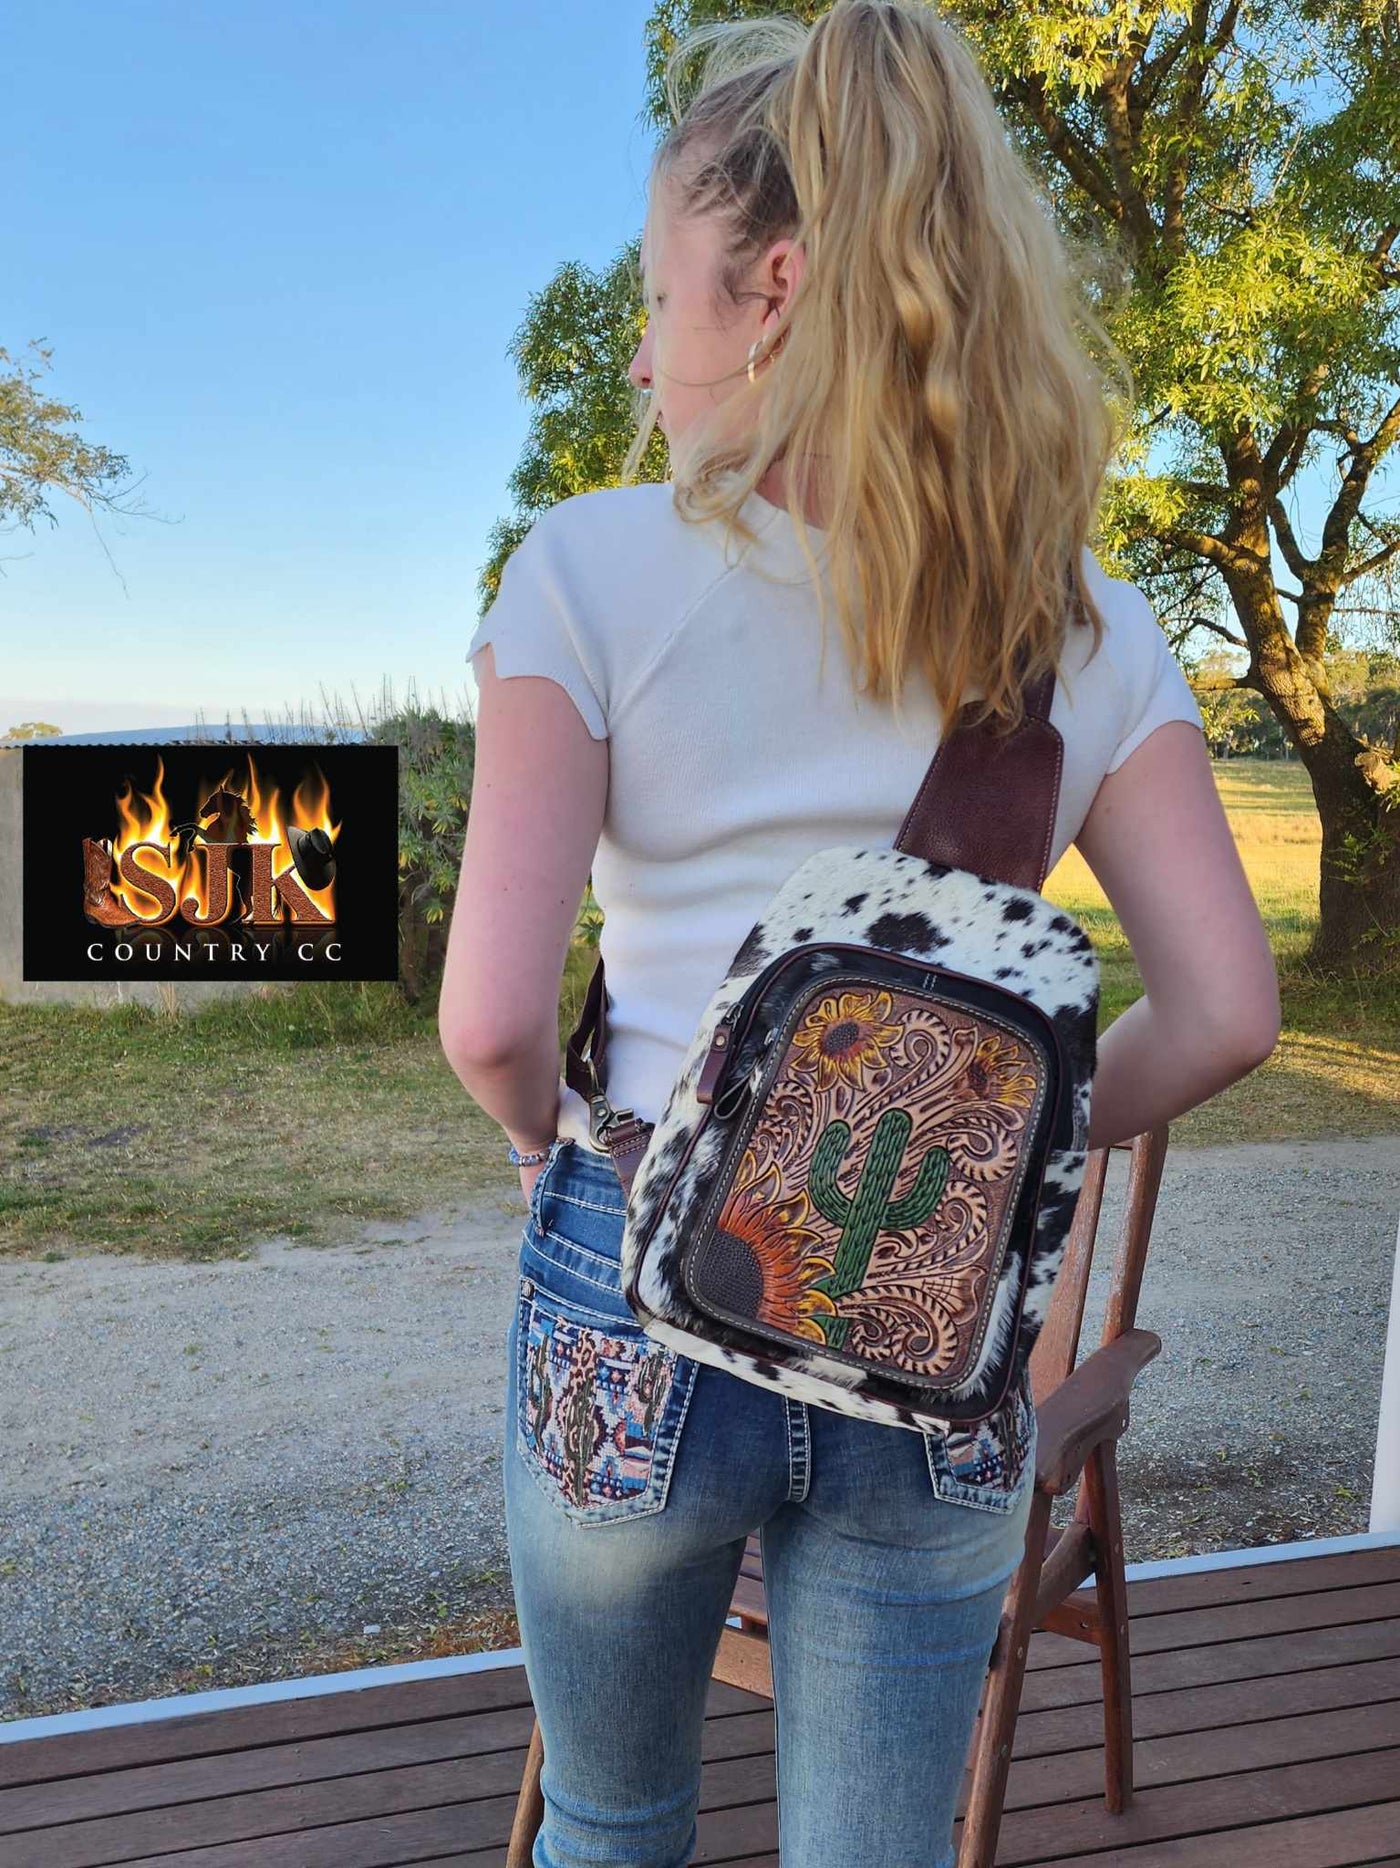 Backpack -  Hair on Hide and Leather Cactus Sling Bag